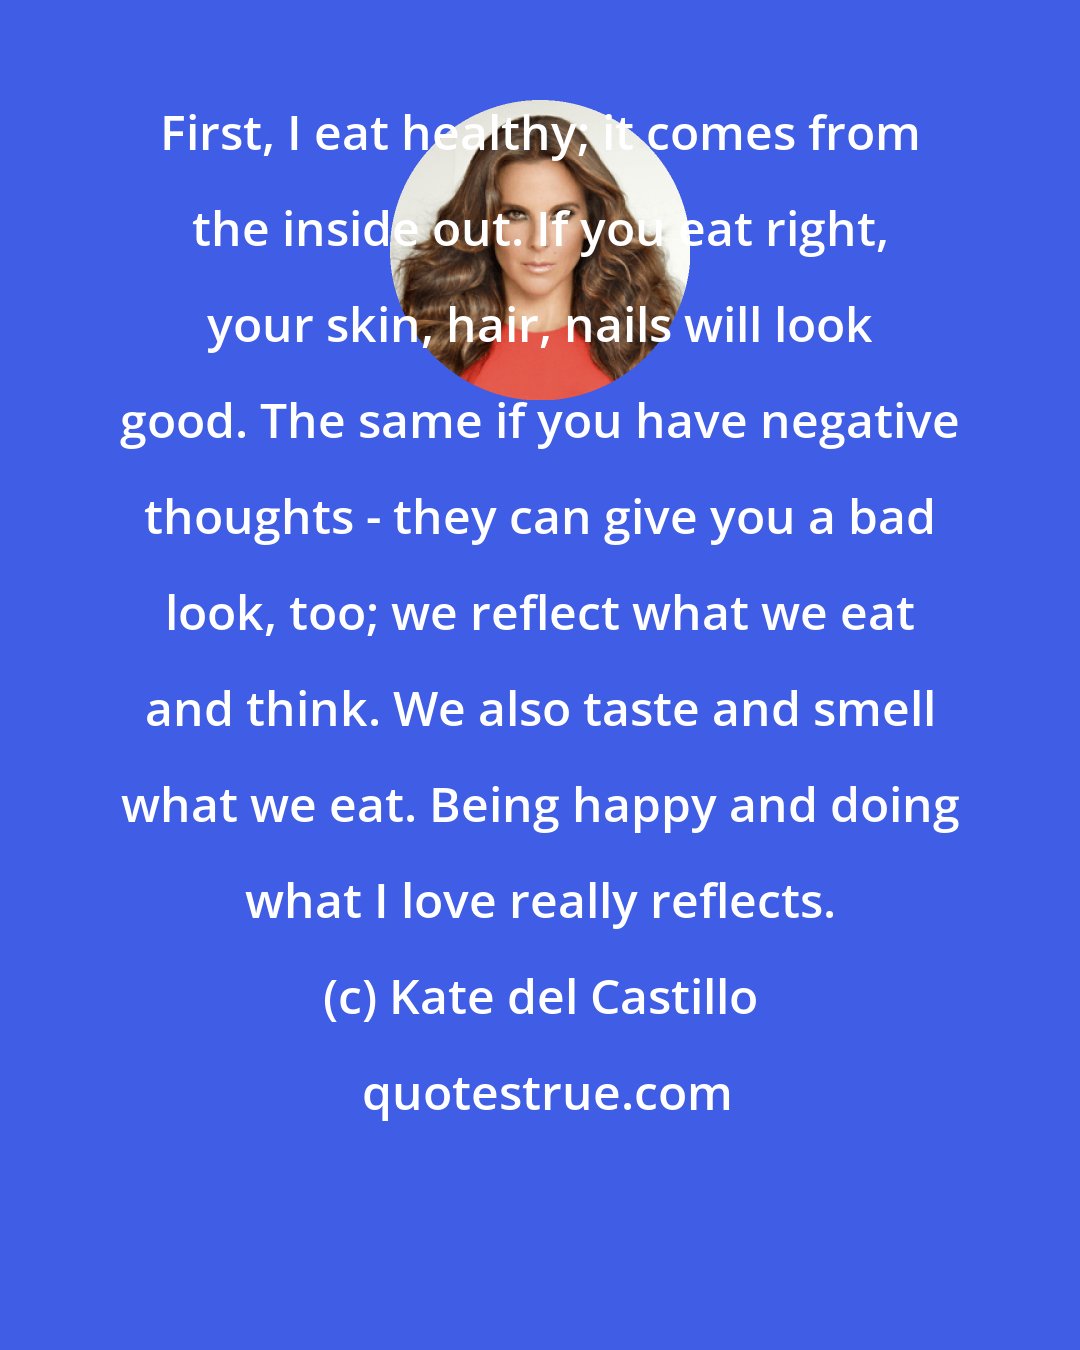 Kate del Castillo: First, I eat healthy; it comes from the inside out. If you eat right, your skin, hair, nails will look good. The same if you have negative thoughts - they can give you a bad look, too; we reflect what we eat and think. We also taste and smell what we eat. Being happy and doing what I love really reflects.